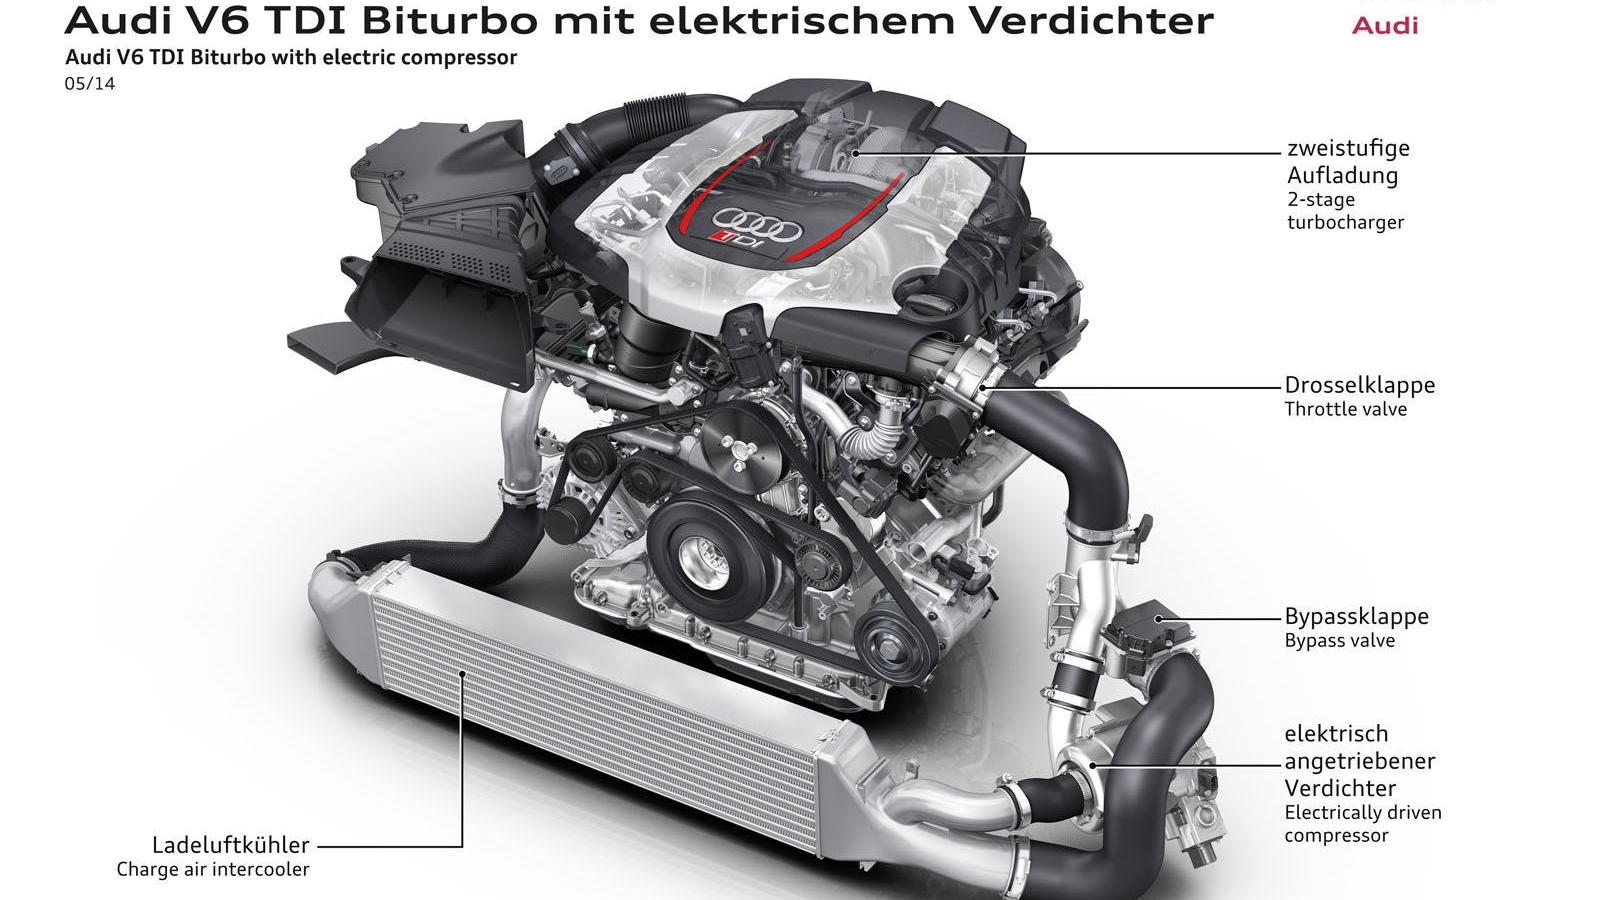 Audi 3.0-liter V-6 TDI with electrically-driven turbocharger